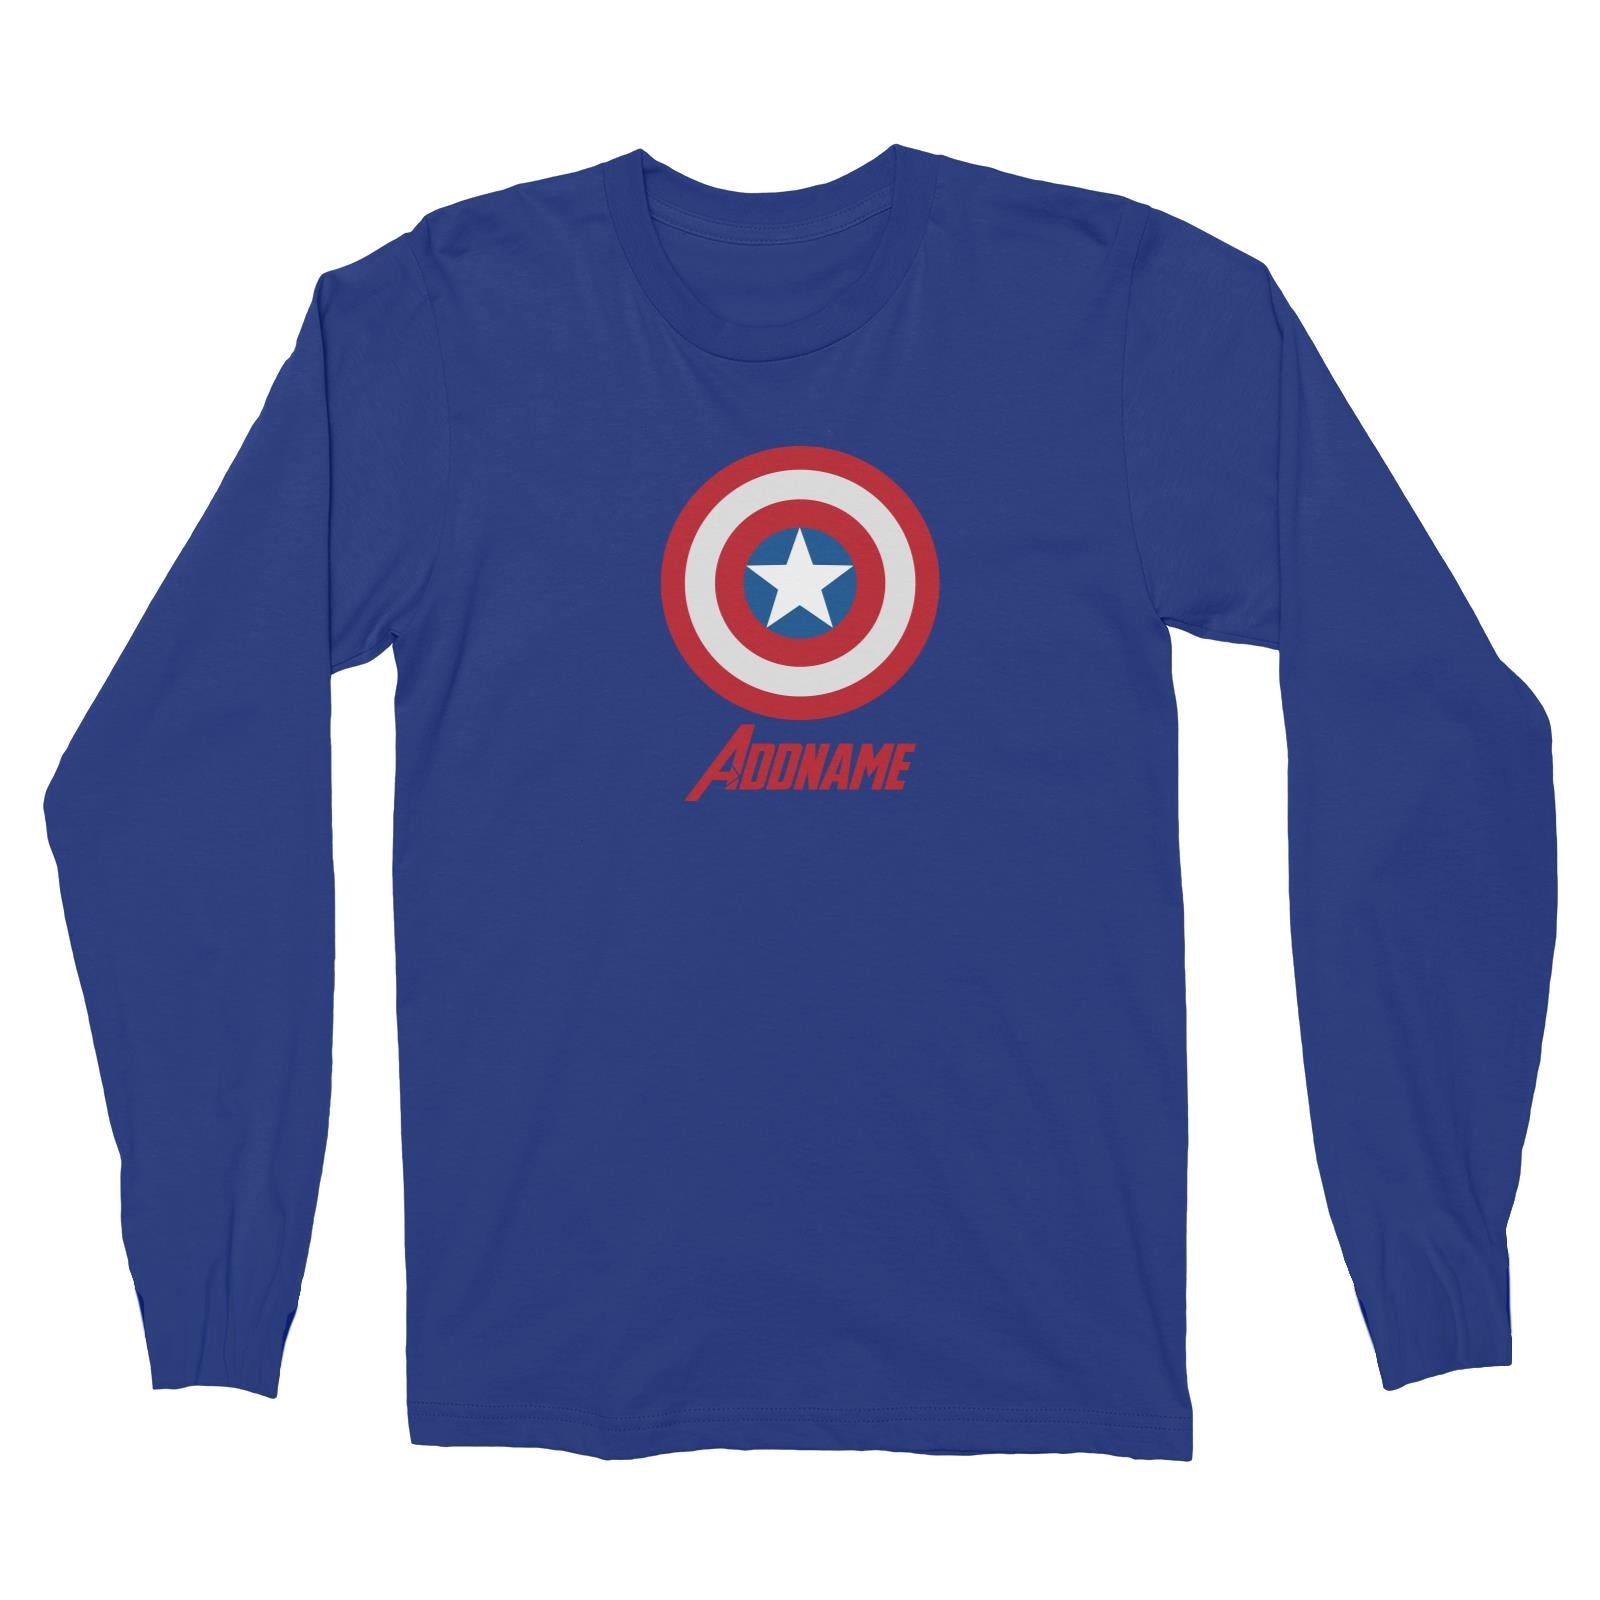 Superhero Shield Captain America Addname Long Sleeve Unisex T-Shirt  Matching Family Personalizable Designs